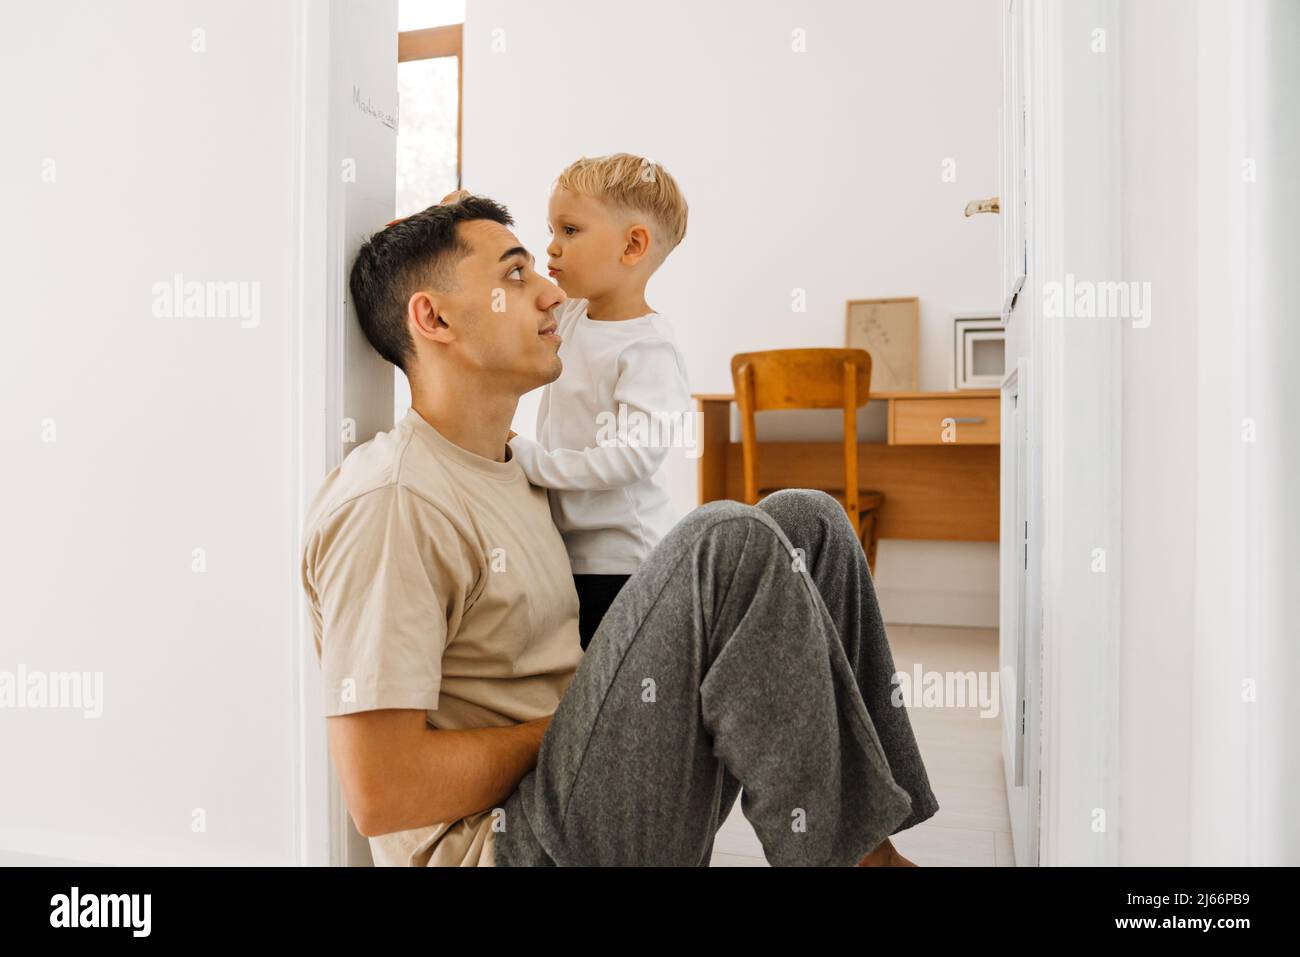 White boy drawing on doorjamb while measuring his father's height at home Stock Photo